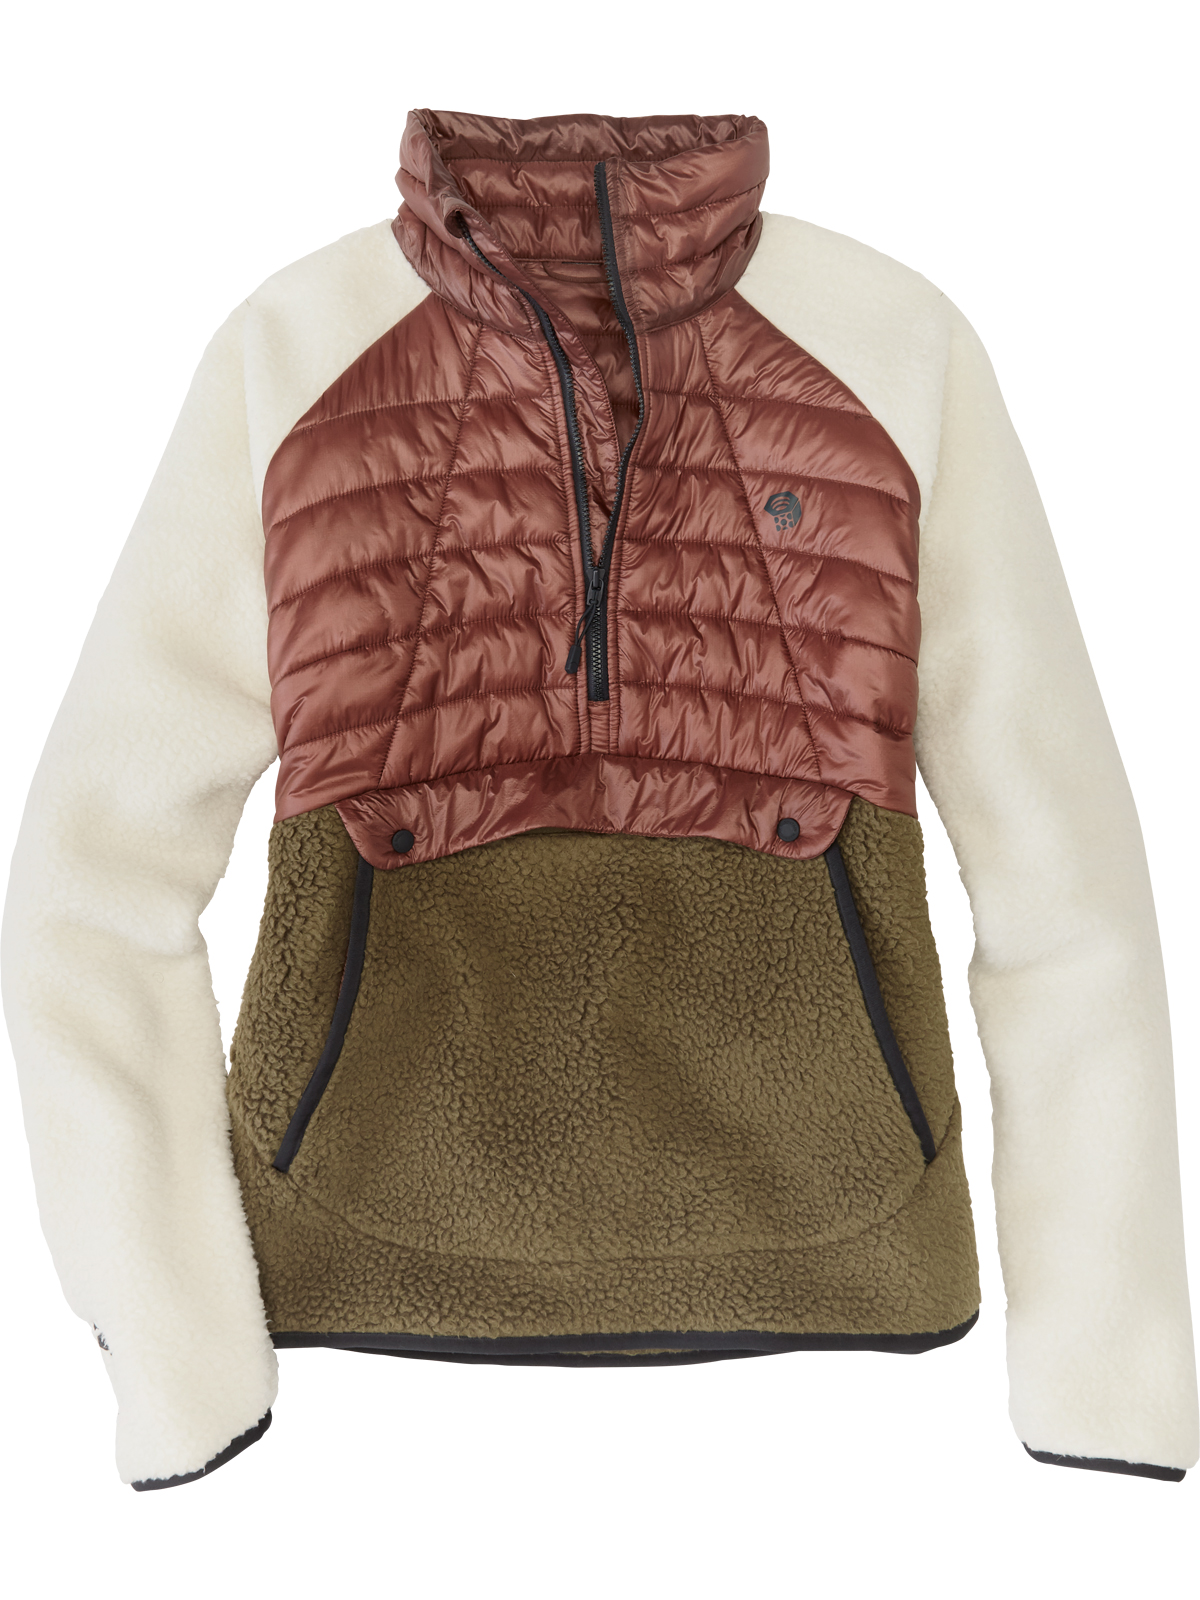 THE NORTH FACE Women's Denali Hoodie - Eastern Mountain Sports